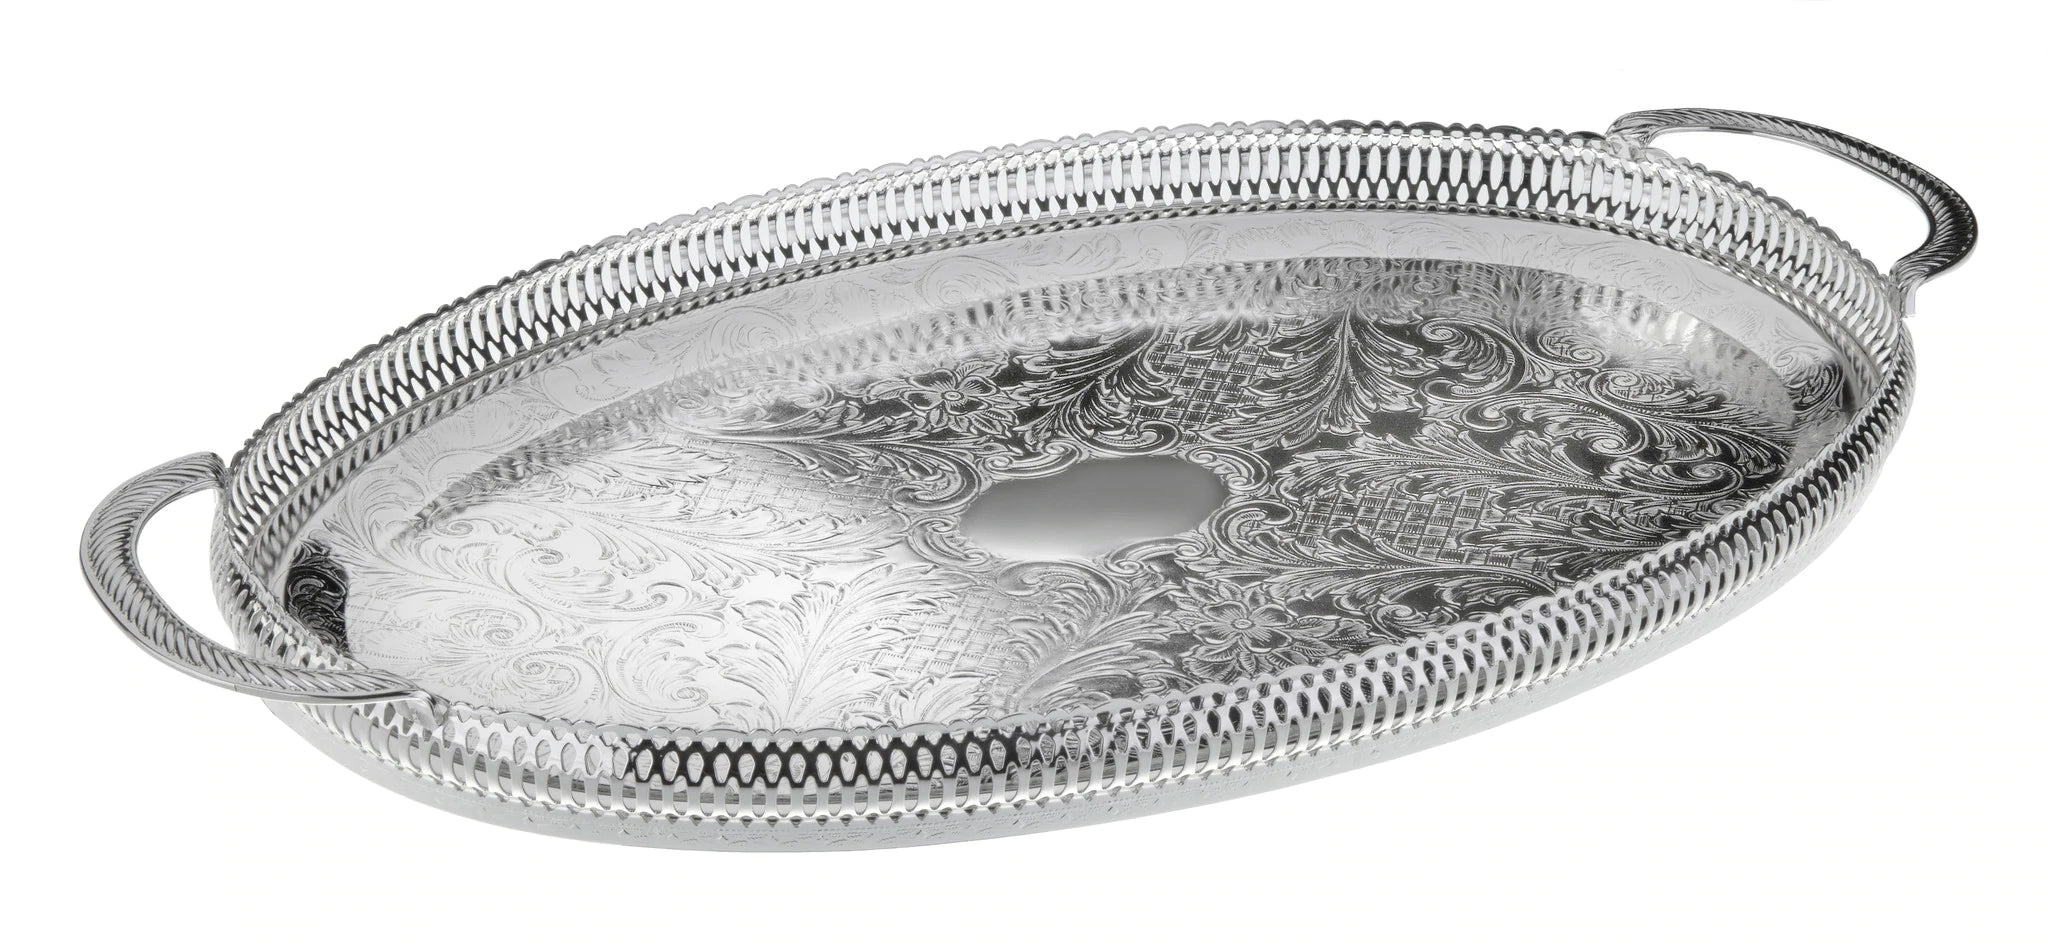 Queen Anne Oval Gallery Tray with Handles - Royal Gift